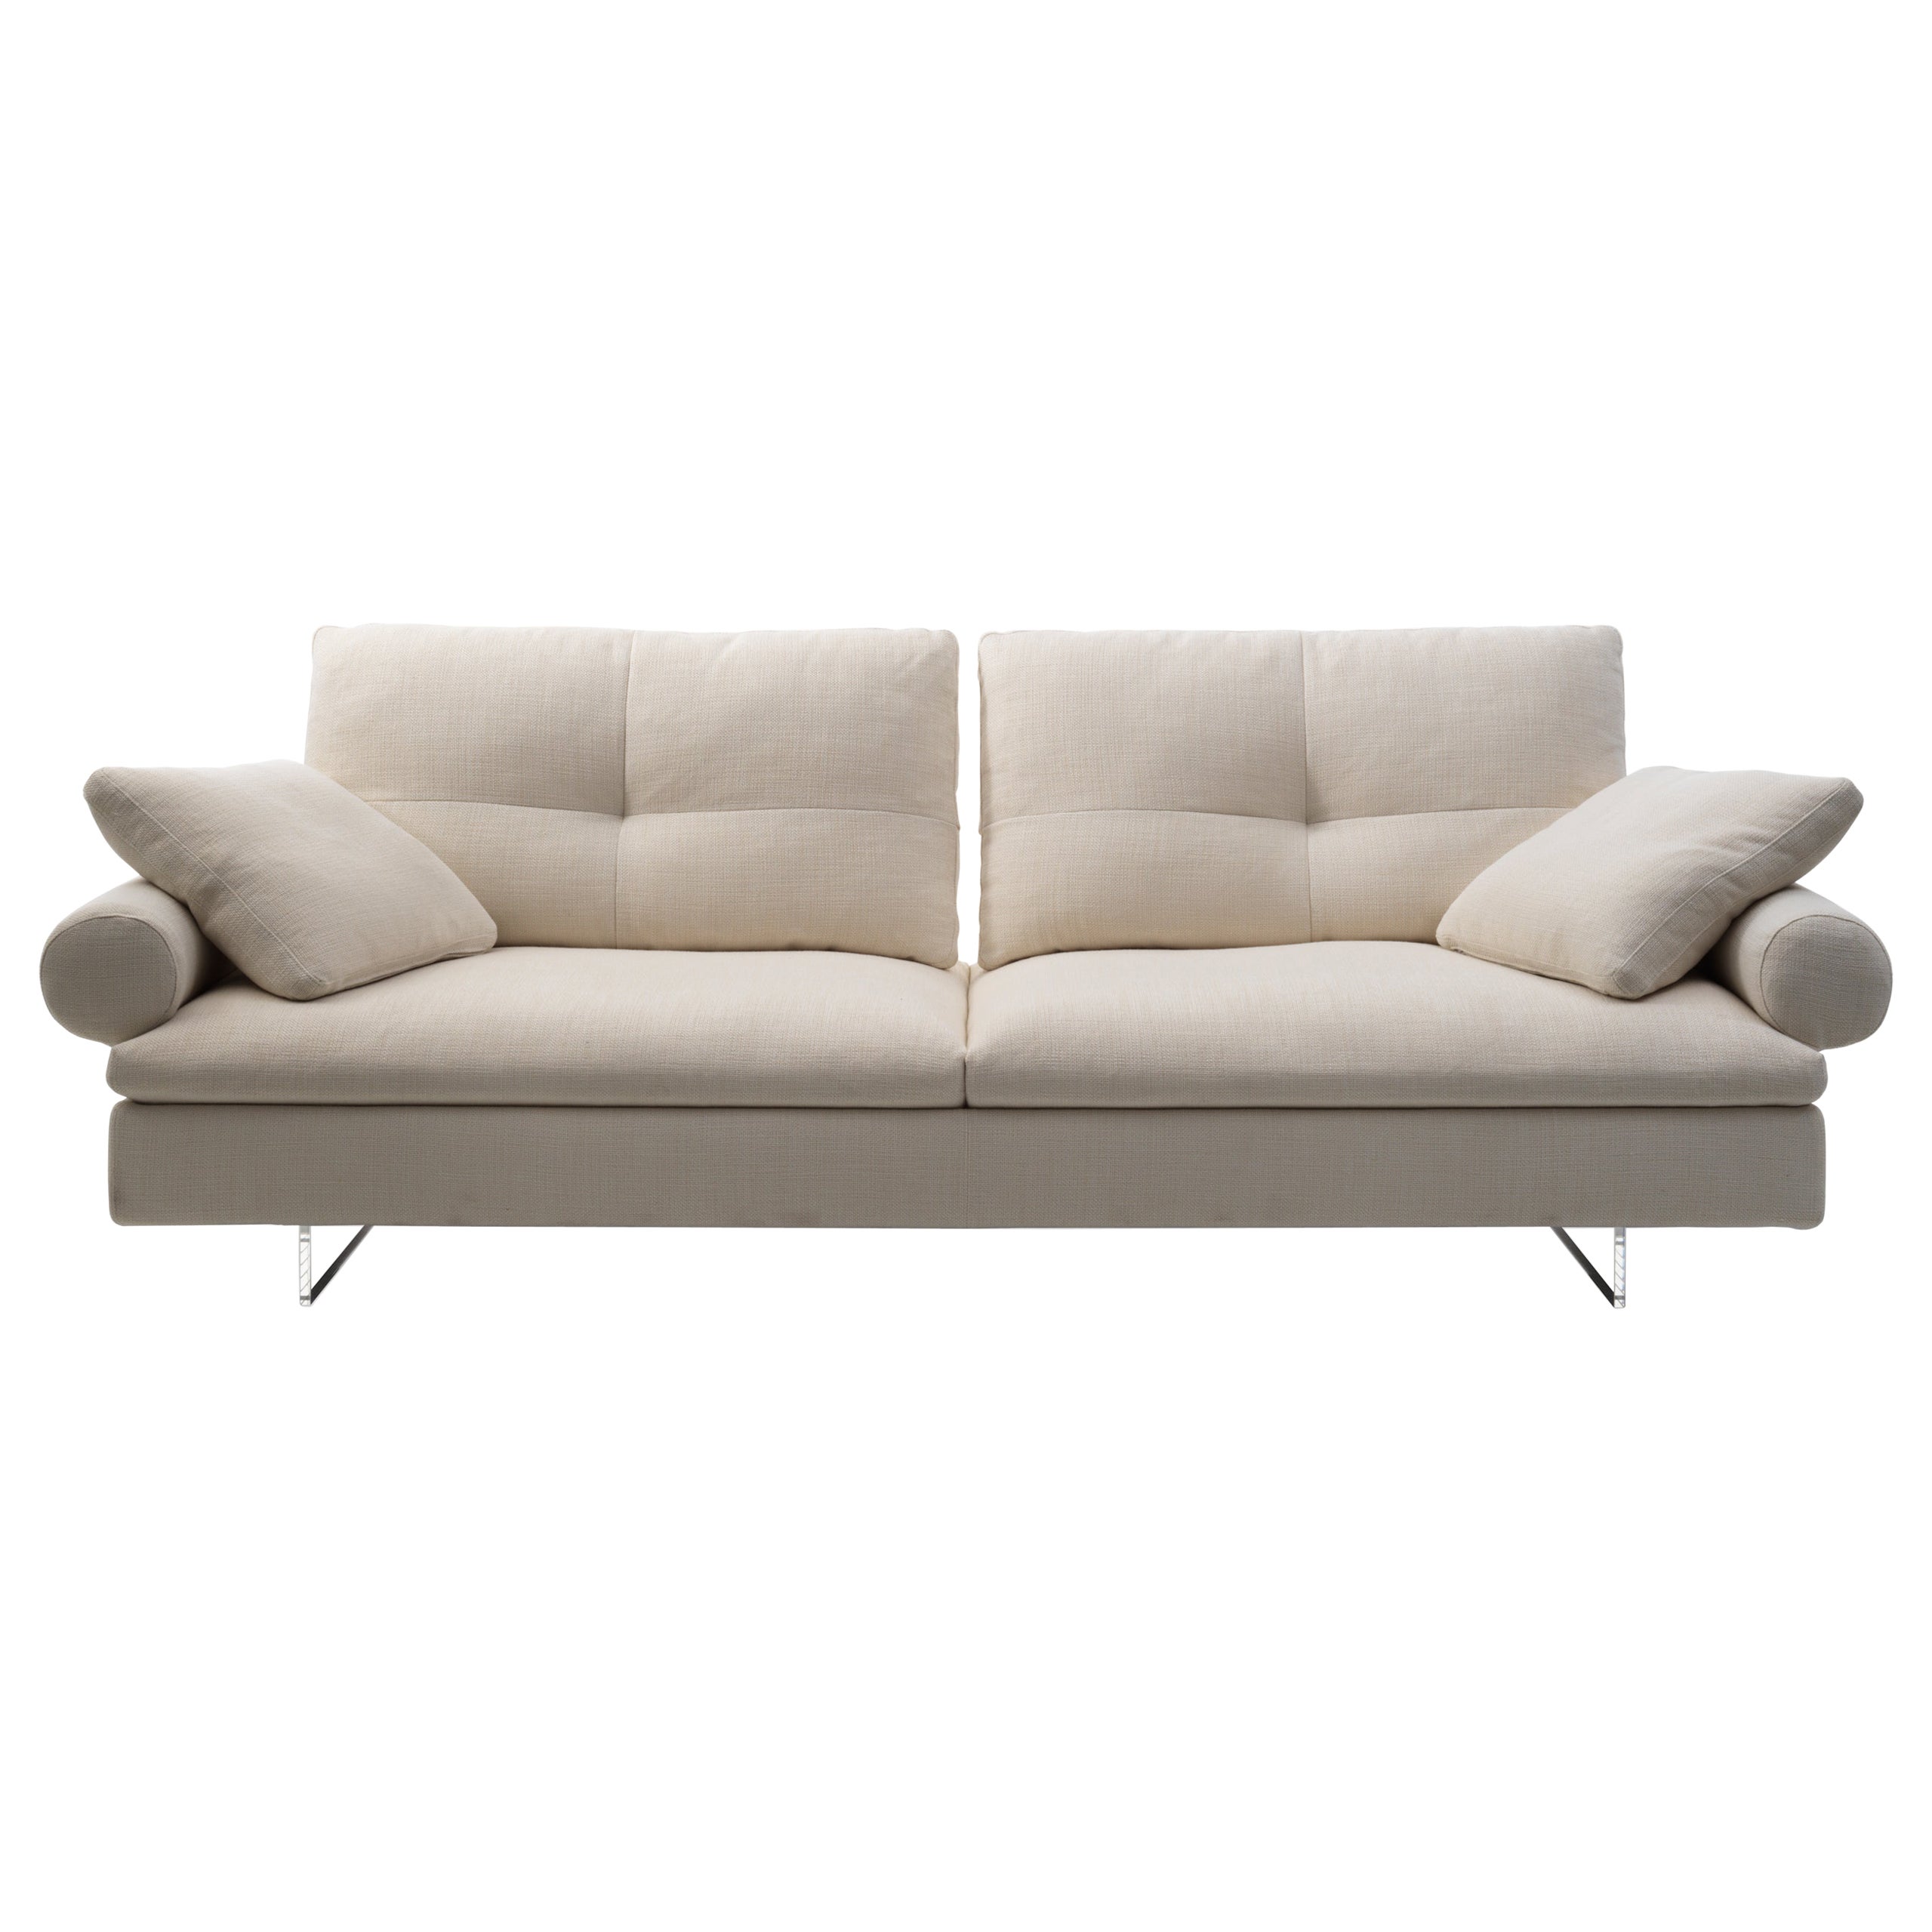 Limes New 88 Medium Sofa in Beige Upholstery with Roll Armrest by Sergio Bicego For Sale